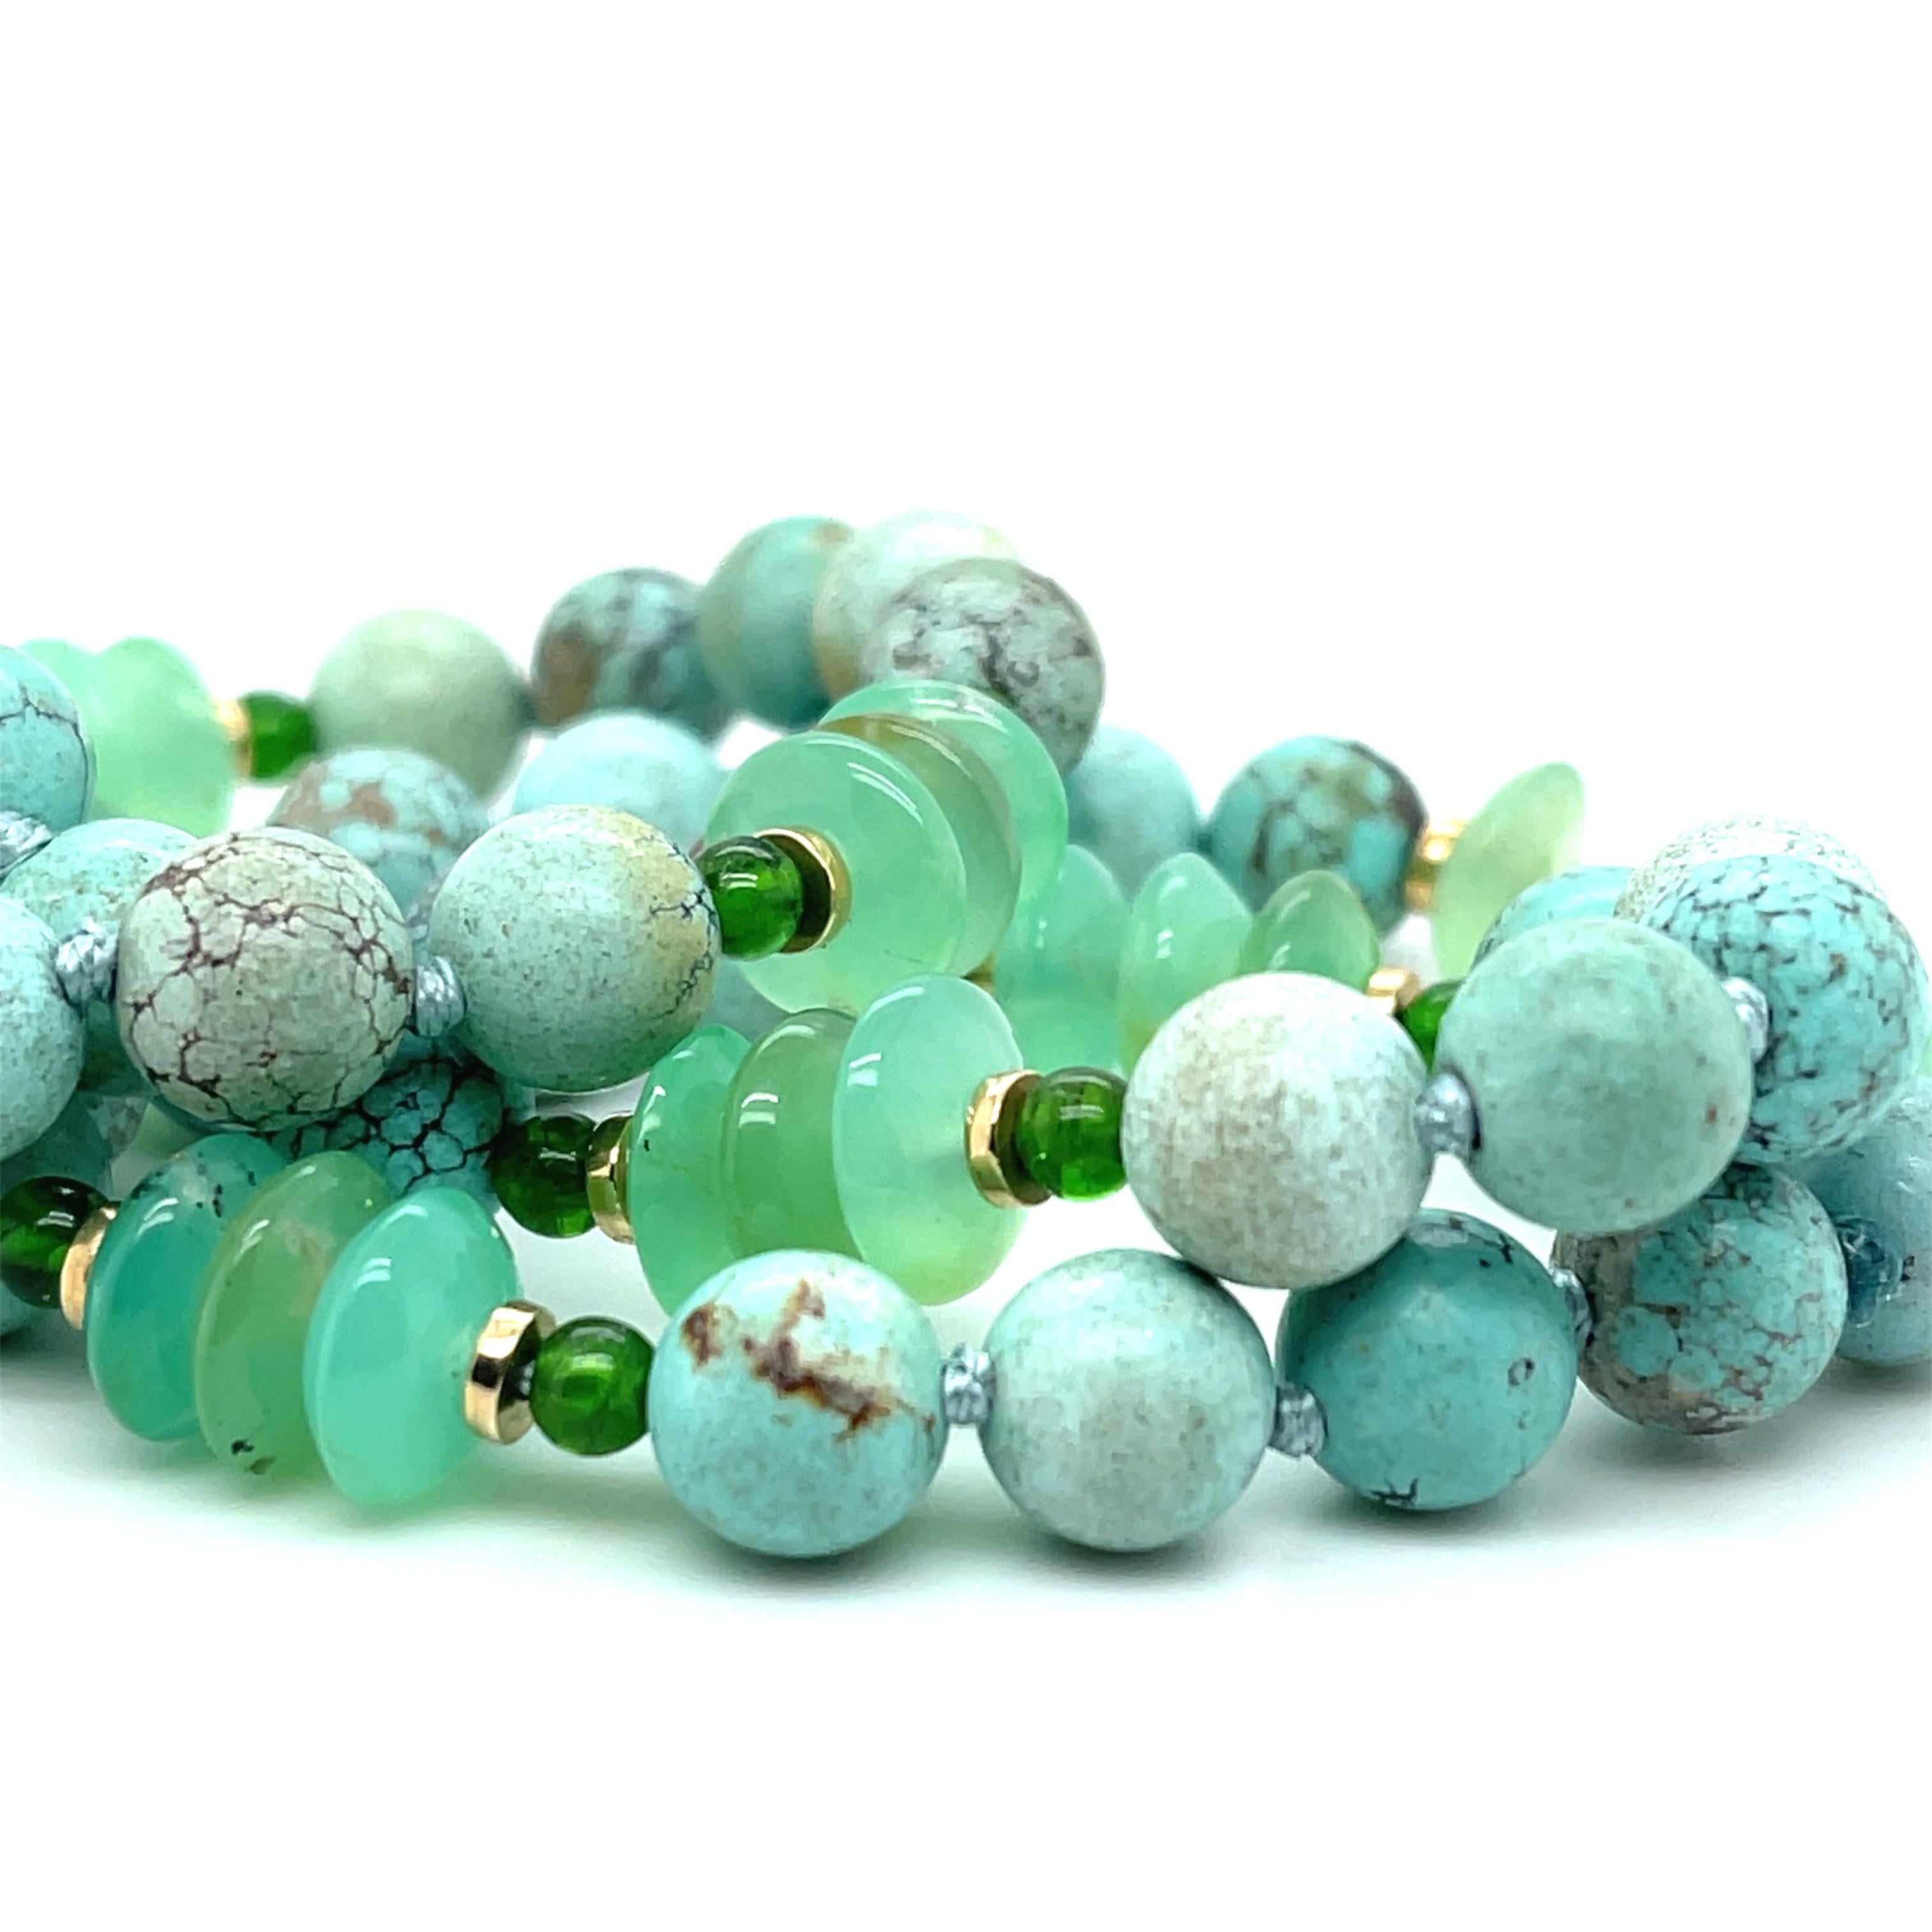 Bead Turquoise, Chrome Diopside and Chrysoprase Necklace, 18 Inches